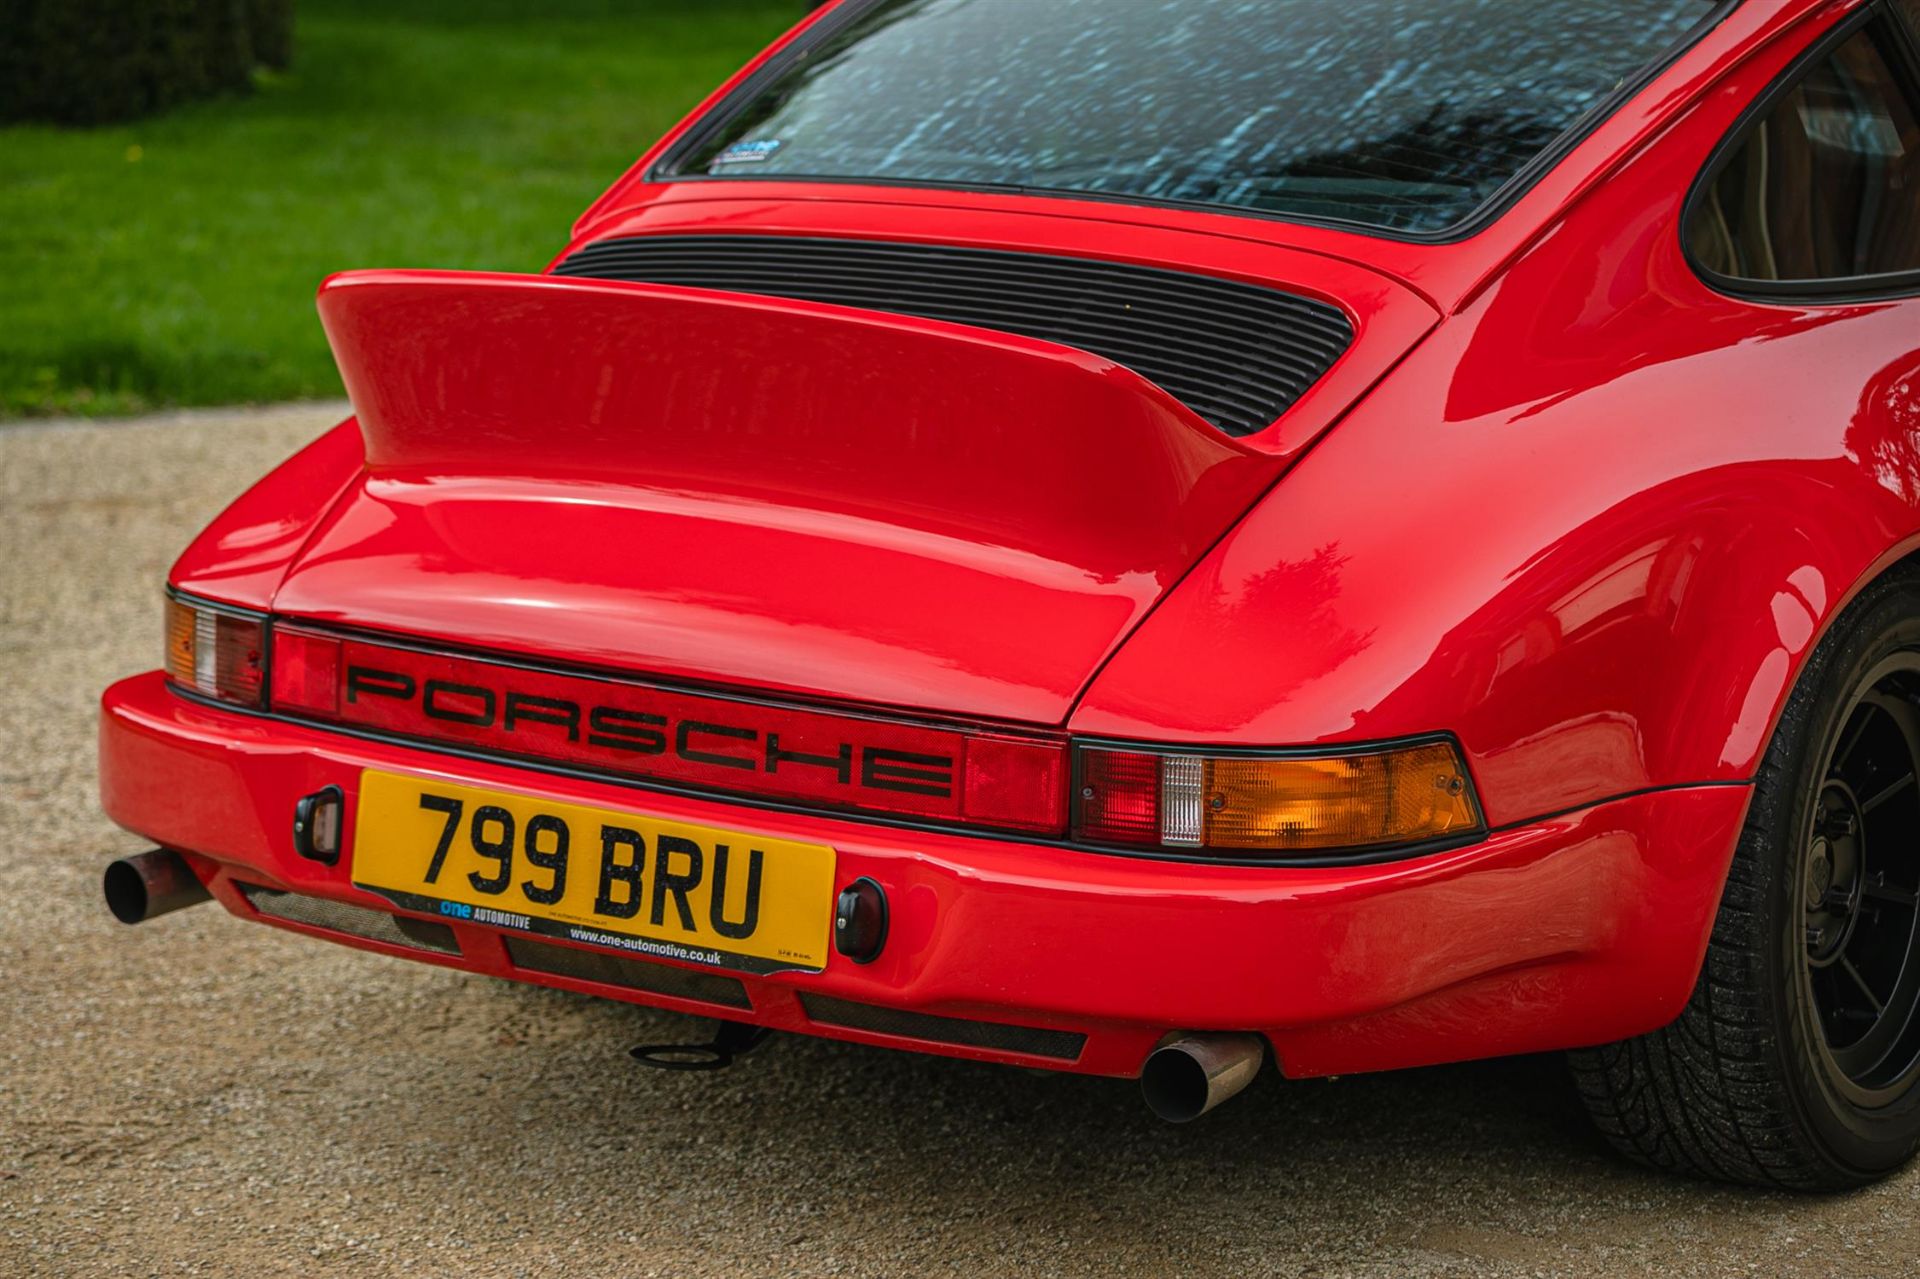 **Sold Pre-Sale**1982 Porsche 911 SC Restomod - Offered Directly From Mike Brewer - Image 8 of 10